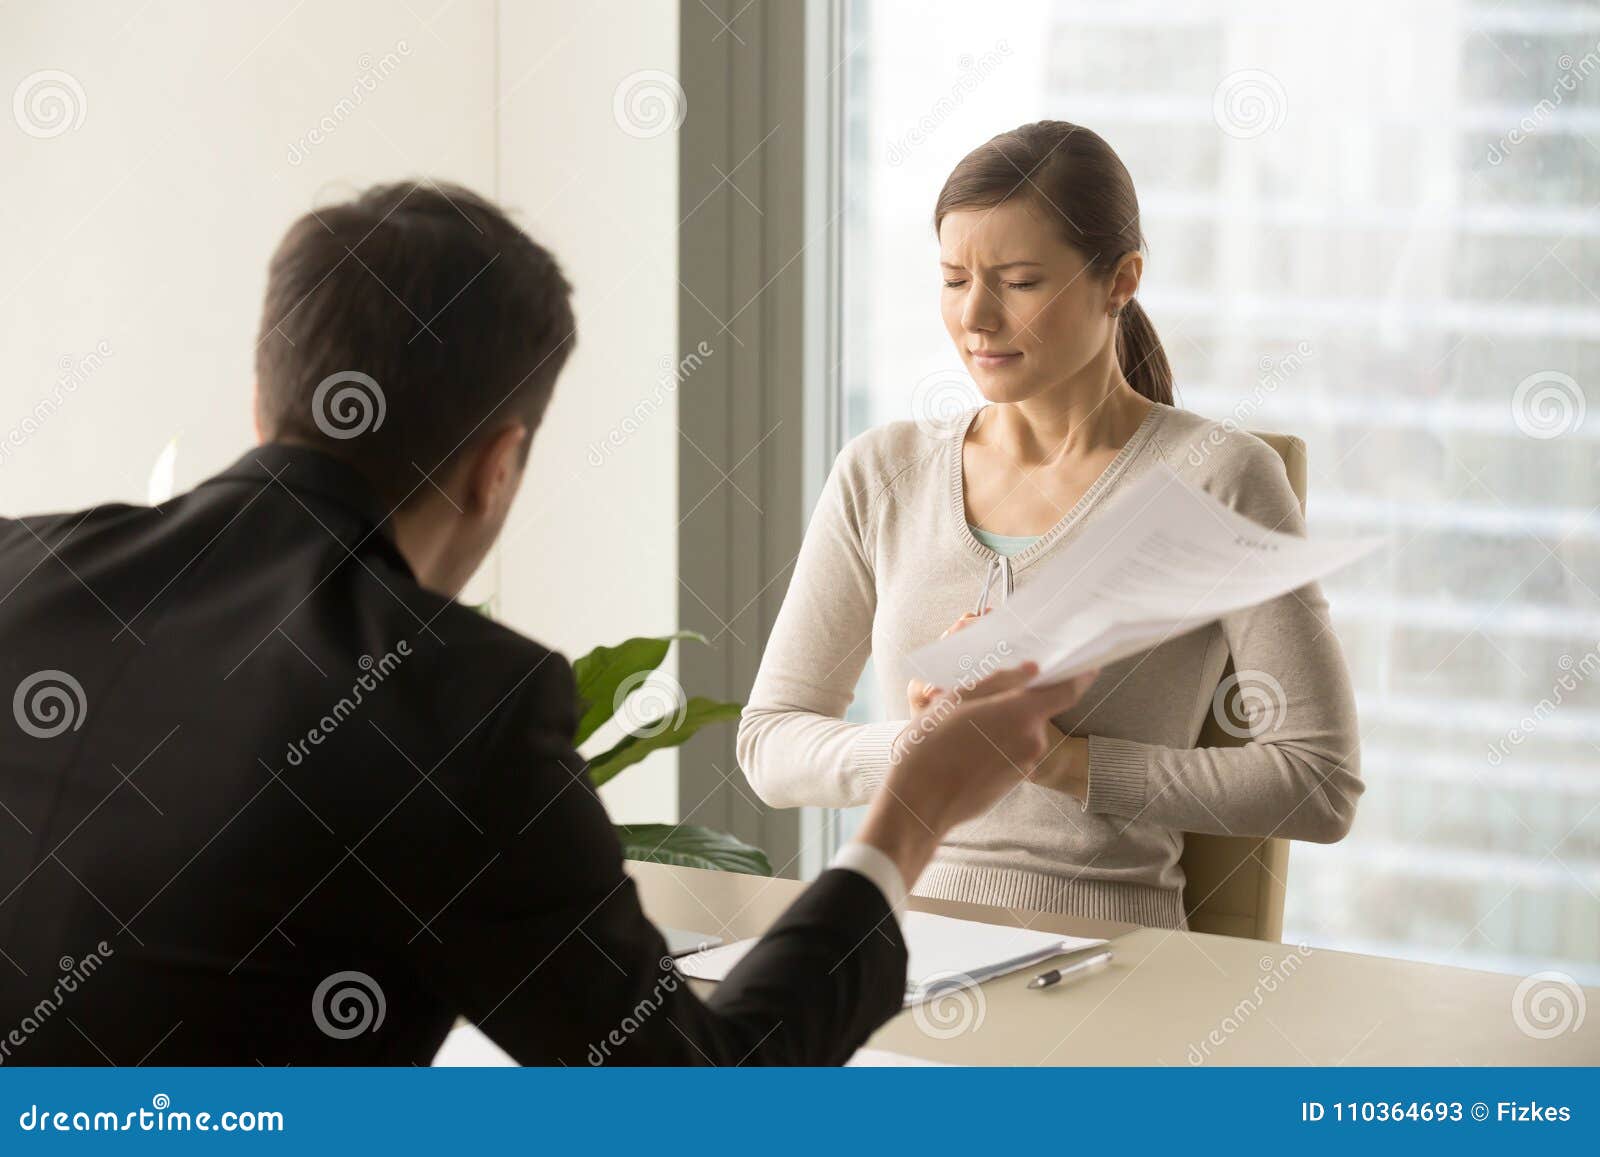 angry boss scolding scared female employee